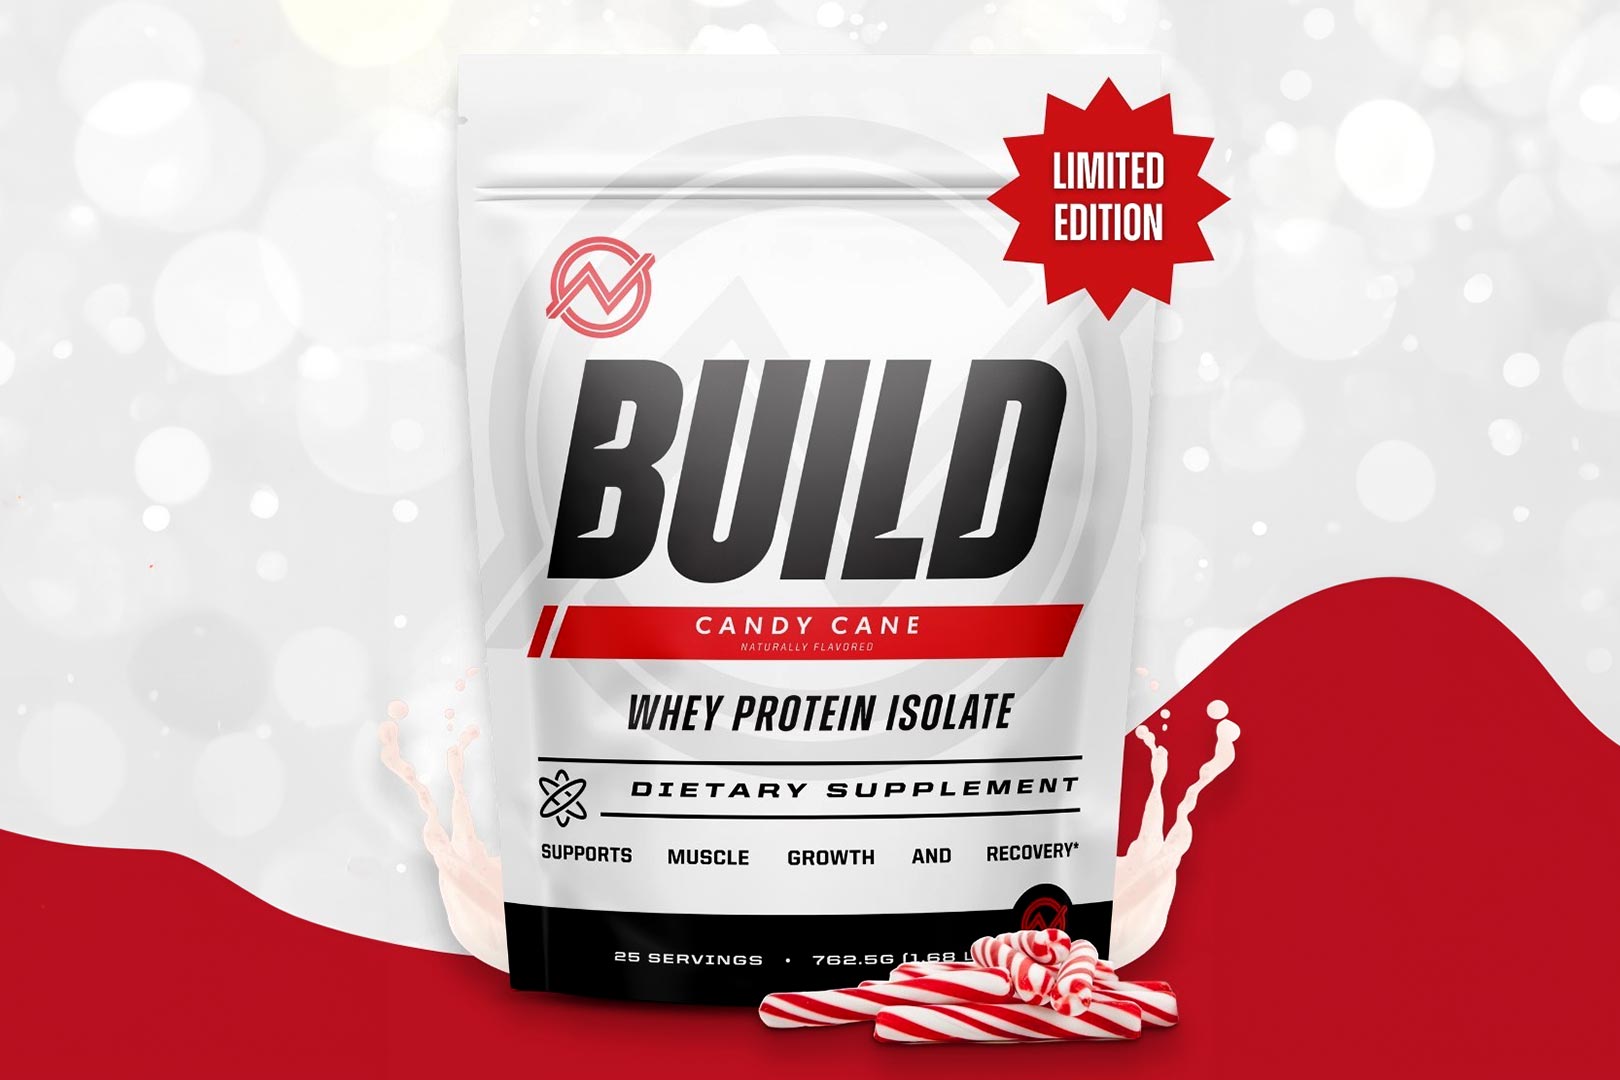 Outwork Candy Cane Build Protein Powder